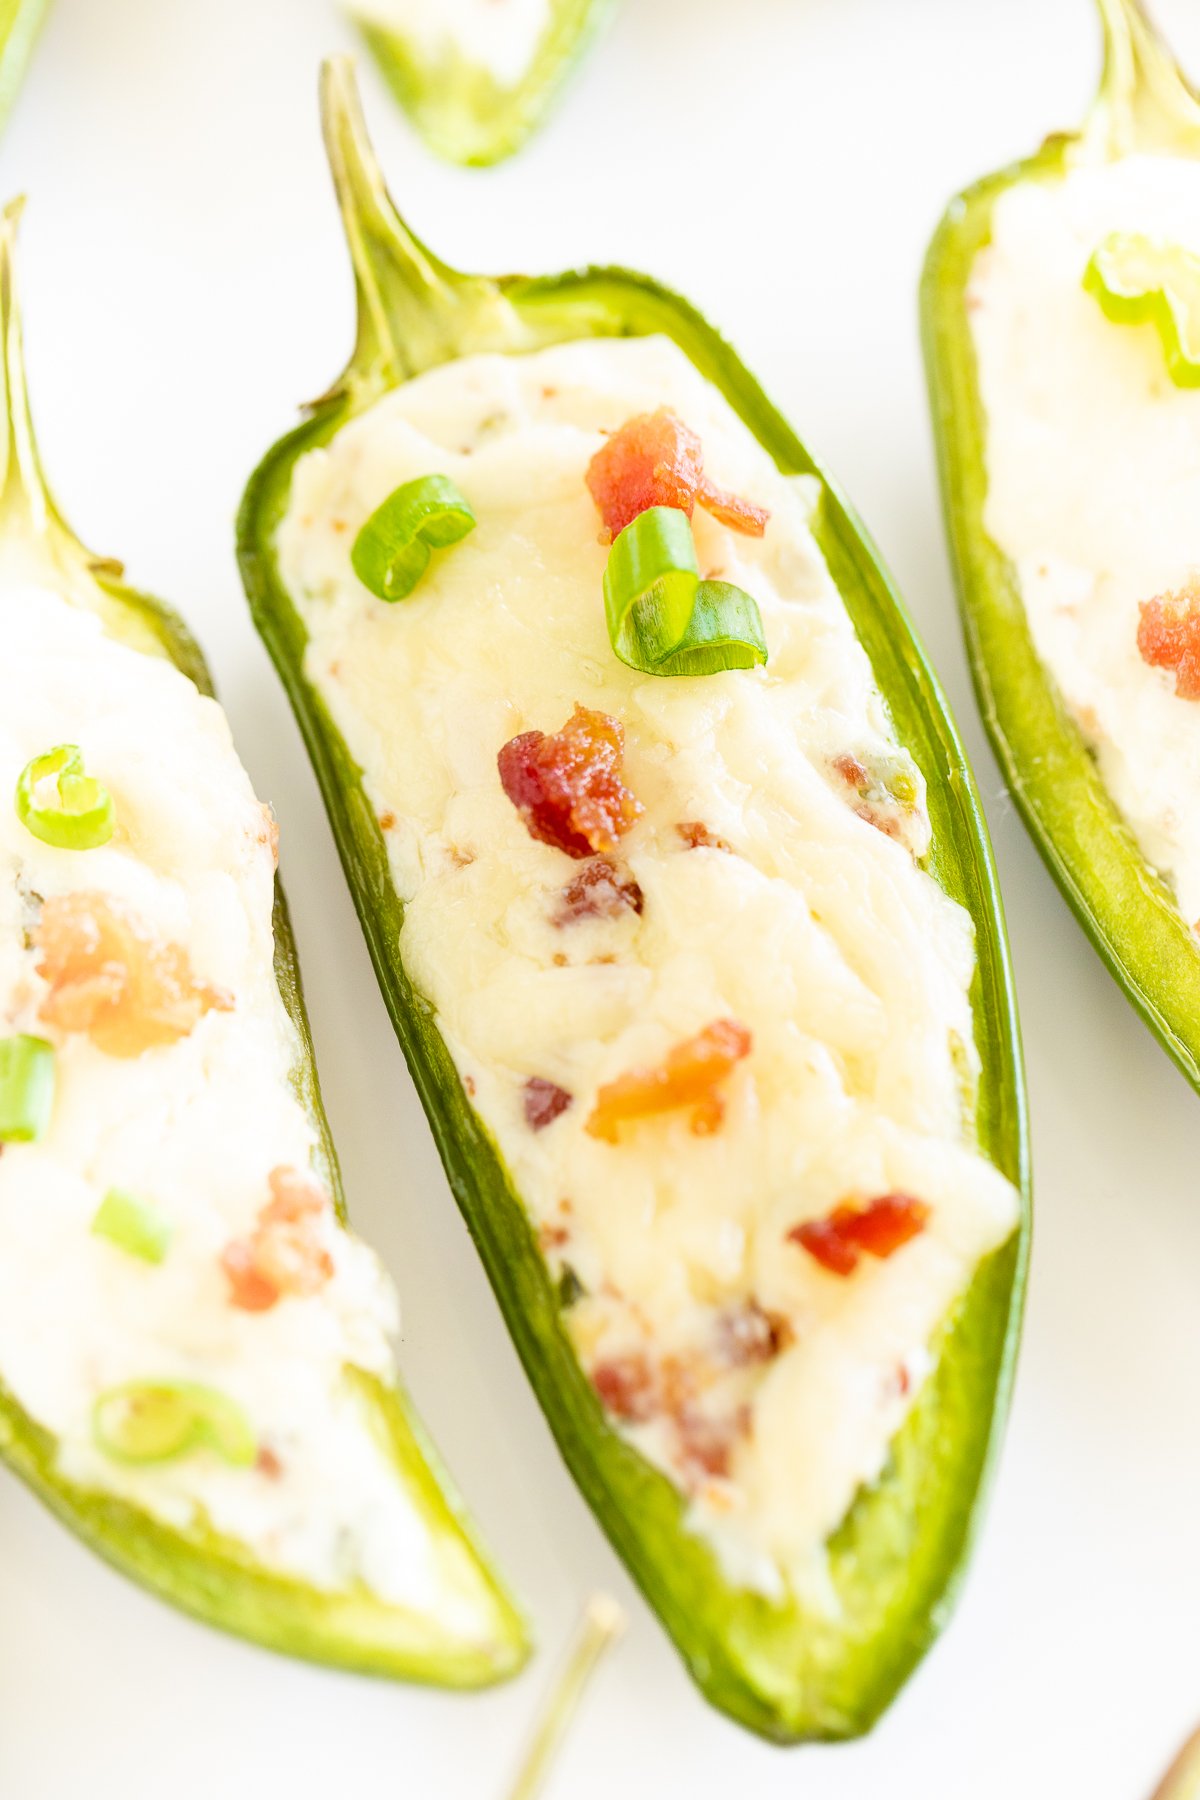 Stuffed jalapenos with cheese and green onions.